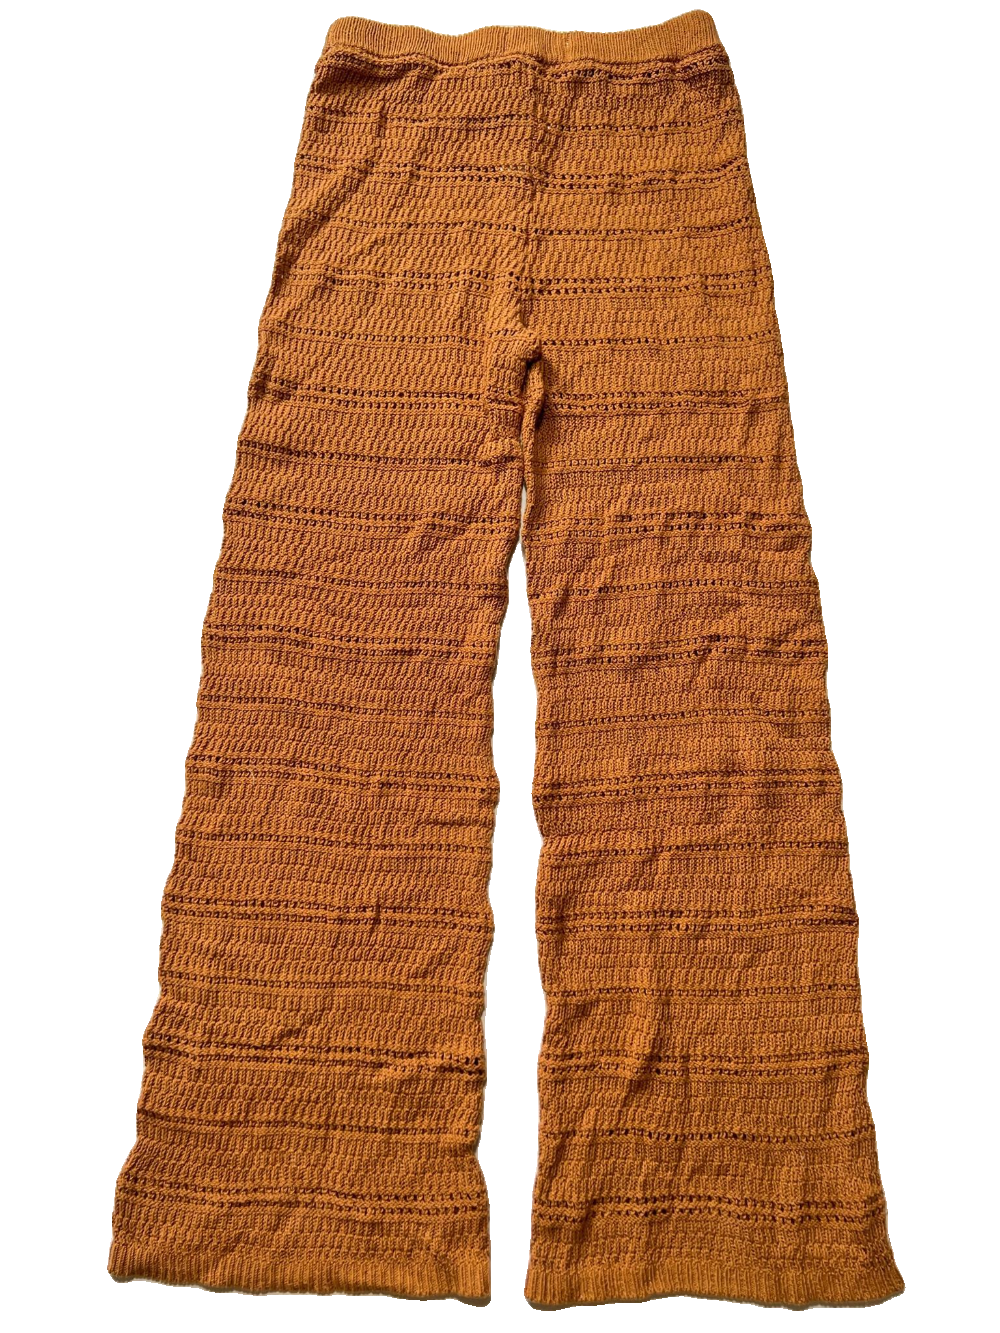 L Space Orange Knit Pants  - NEW WITH TAGS